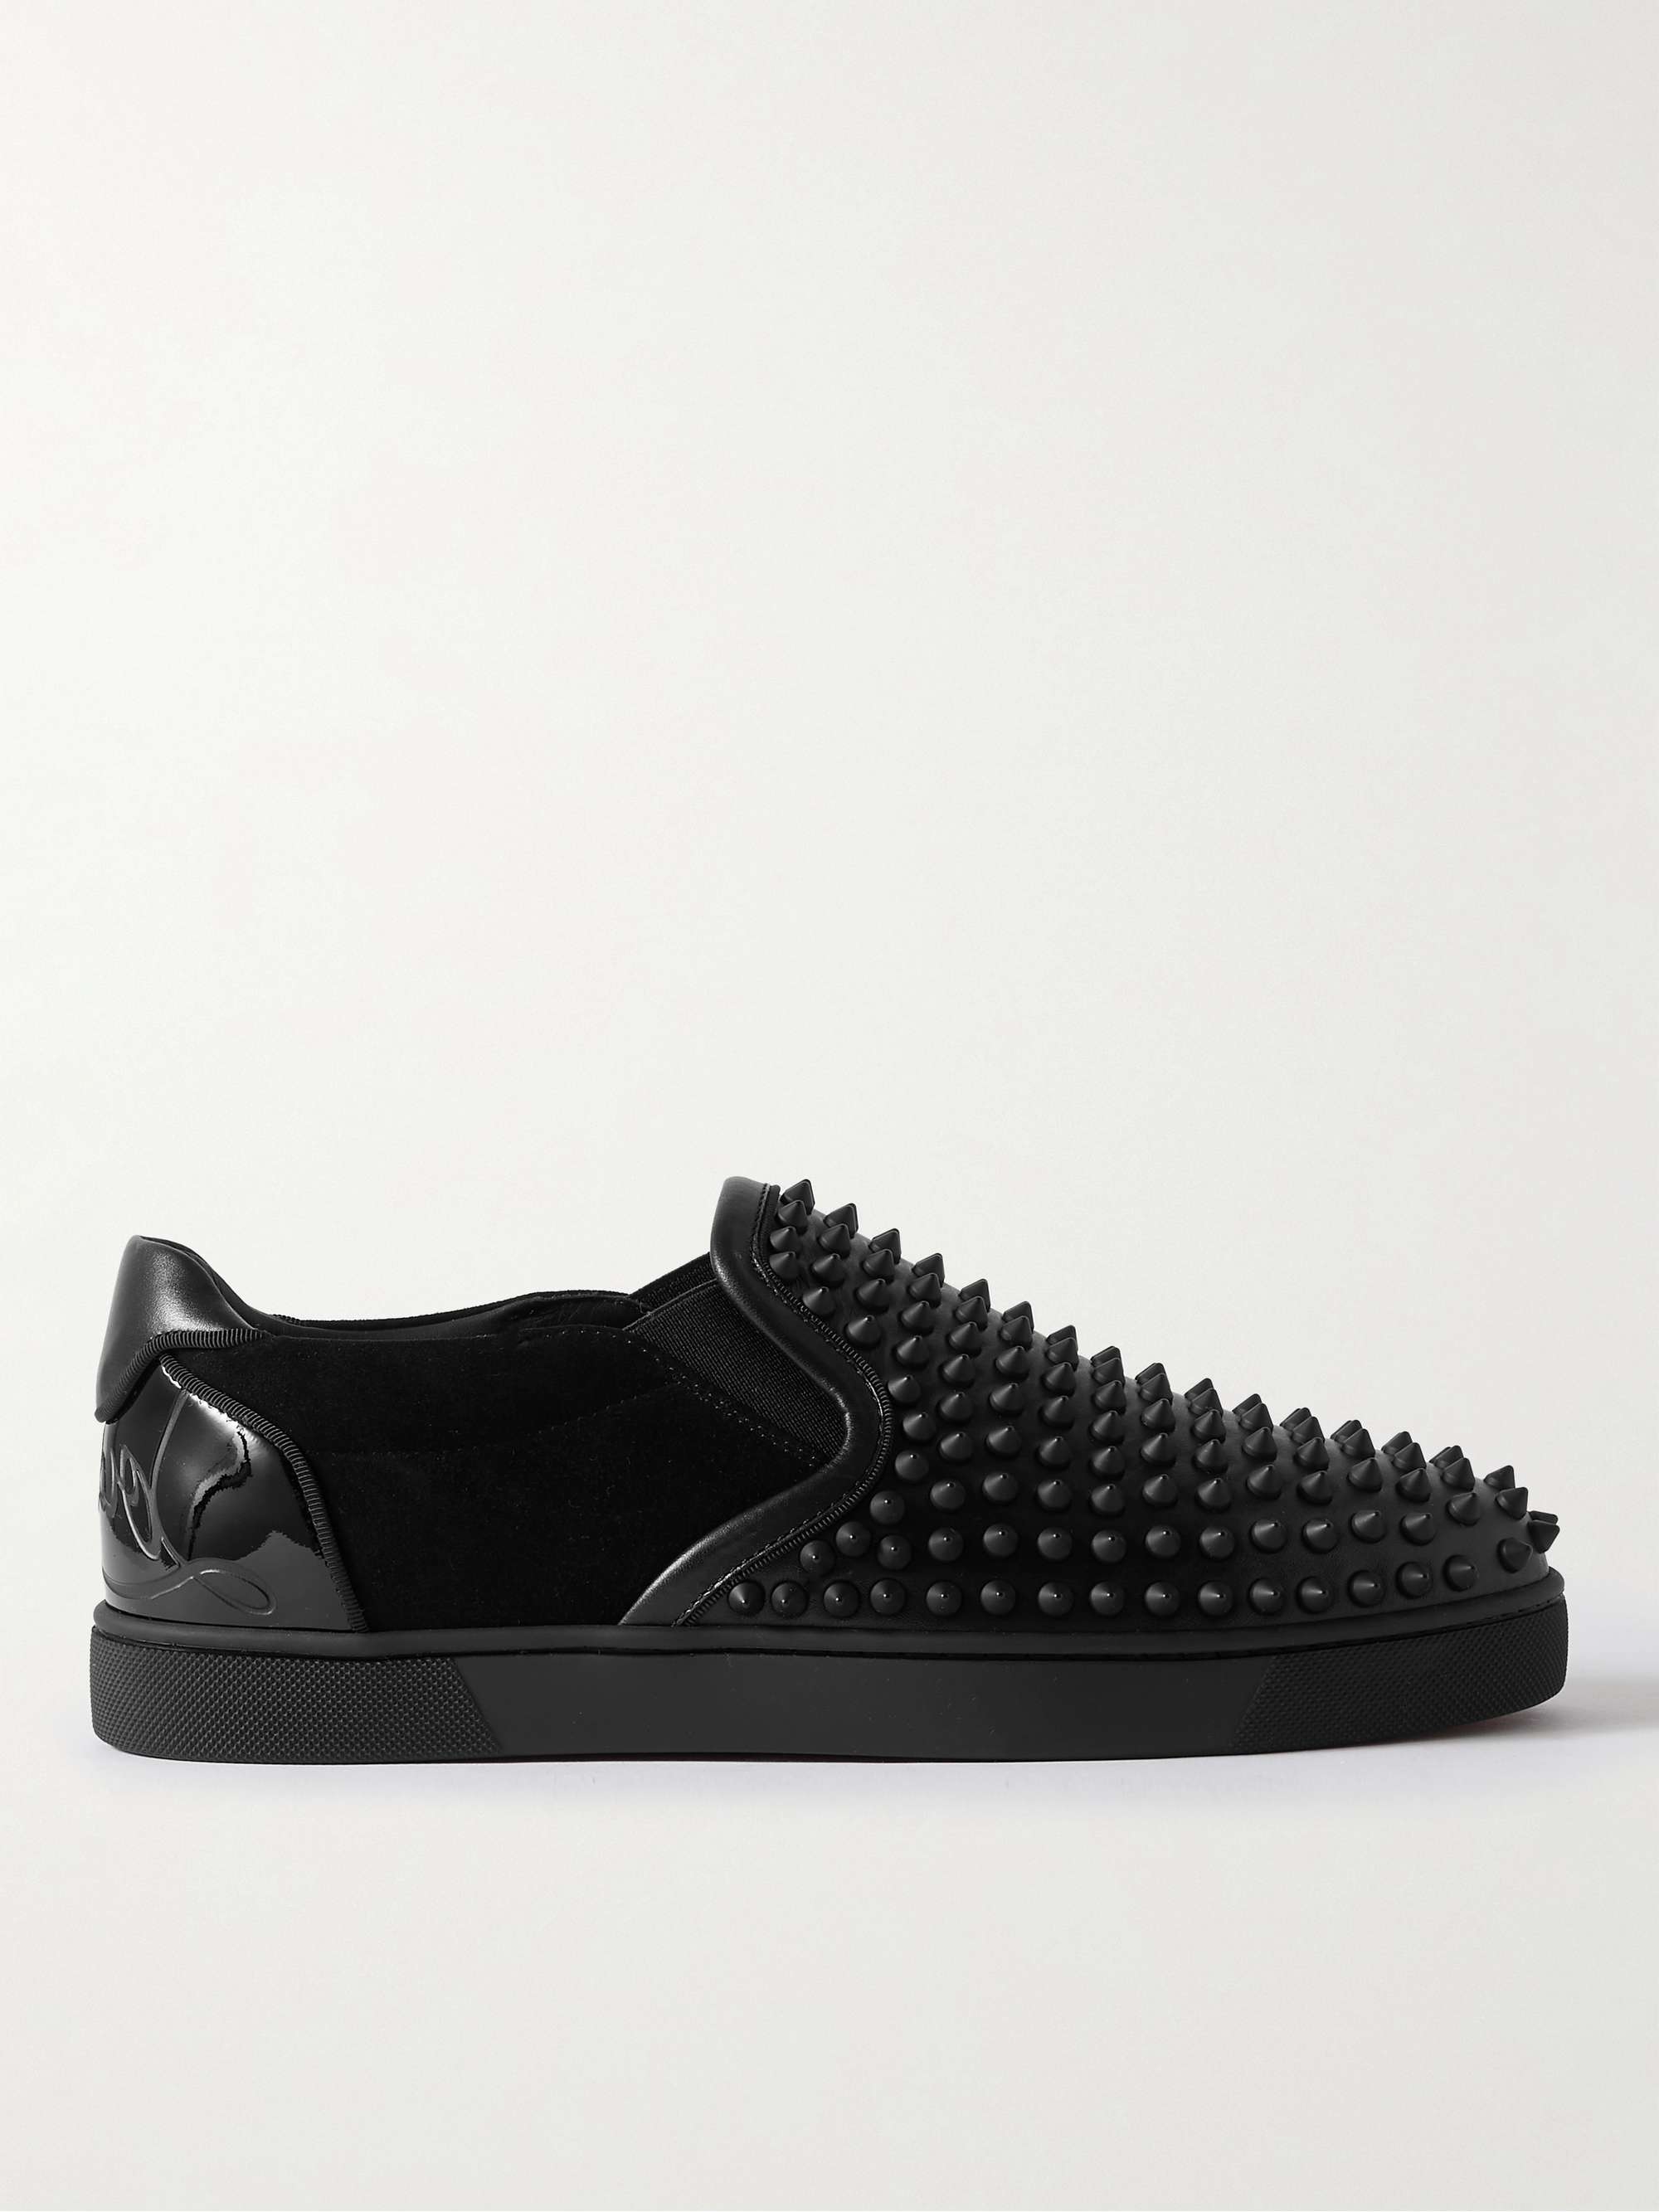 CHRISTIAN LOUBOUTIN Fun Sailor Studded Leather and Suede Slip-On Sneakers |  MR PORTER